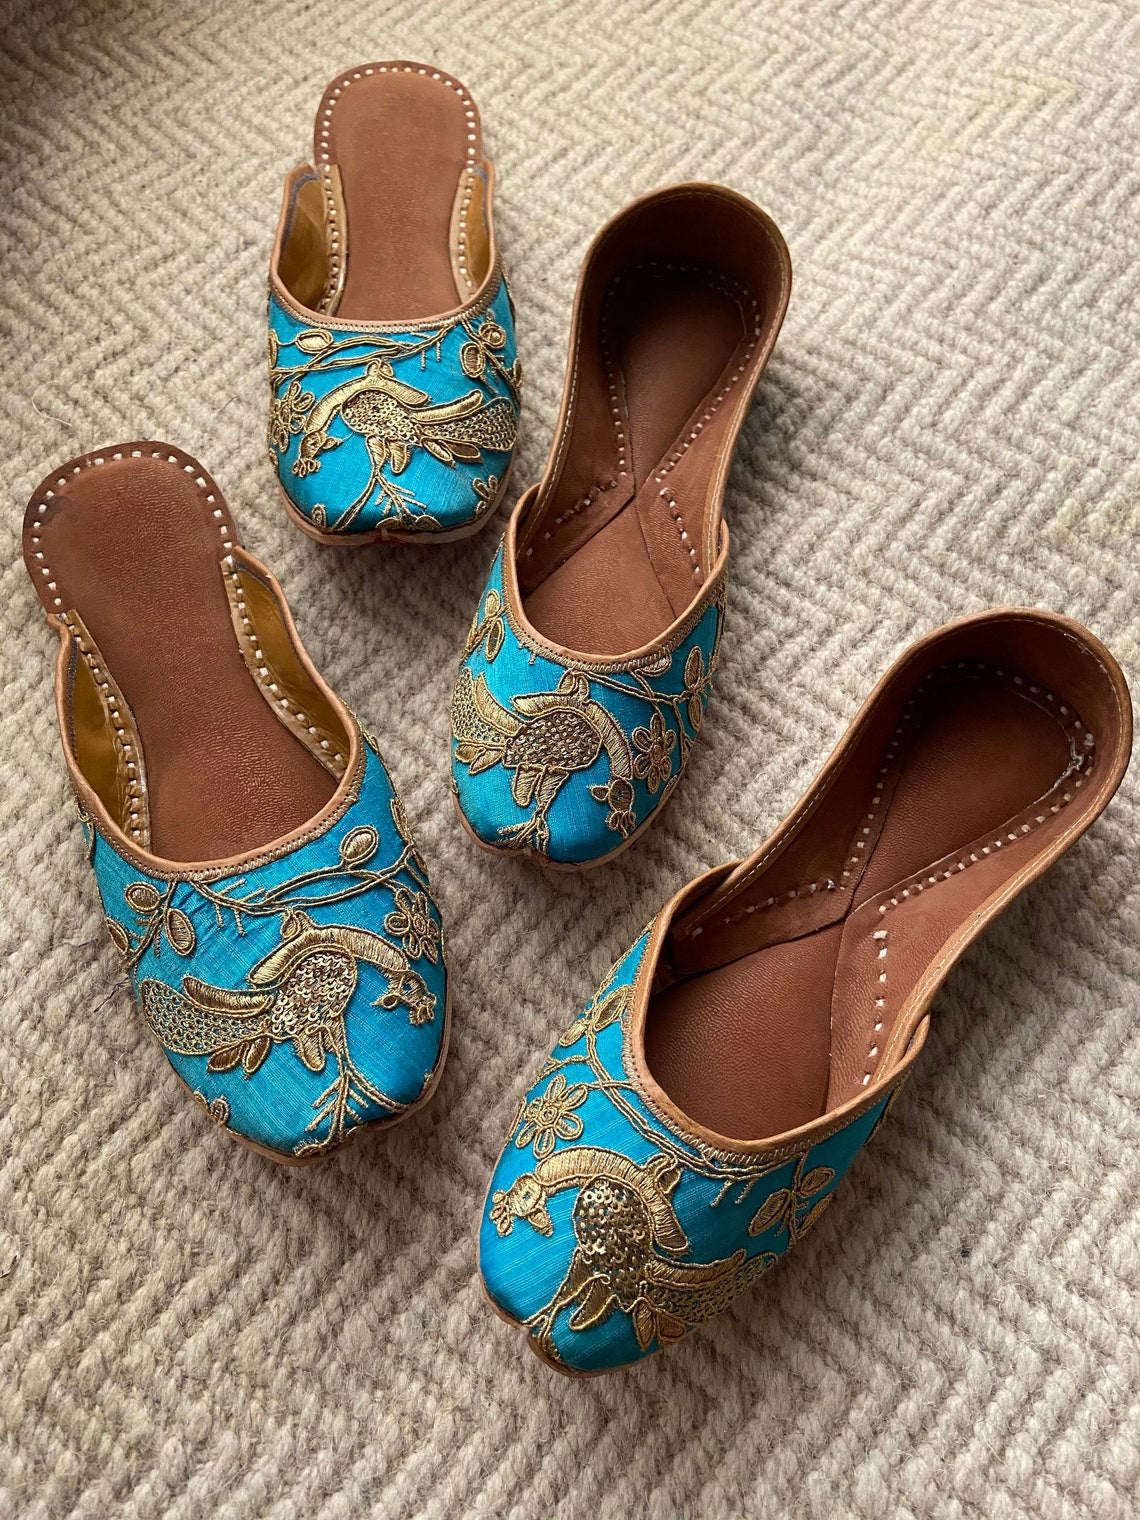 Blue Embroidered Juttis - Indian Clothing in Denver, CO, Aurora, CO, Boulder, CO, Fort Collins, CO, Colorado Springs, CO, Parker, CO, Highlands Ranch, CO, Cherry Creek, CO, Centennial, CO, and Longmont, CO. Nationwide shipping USA - India Fashion X